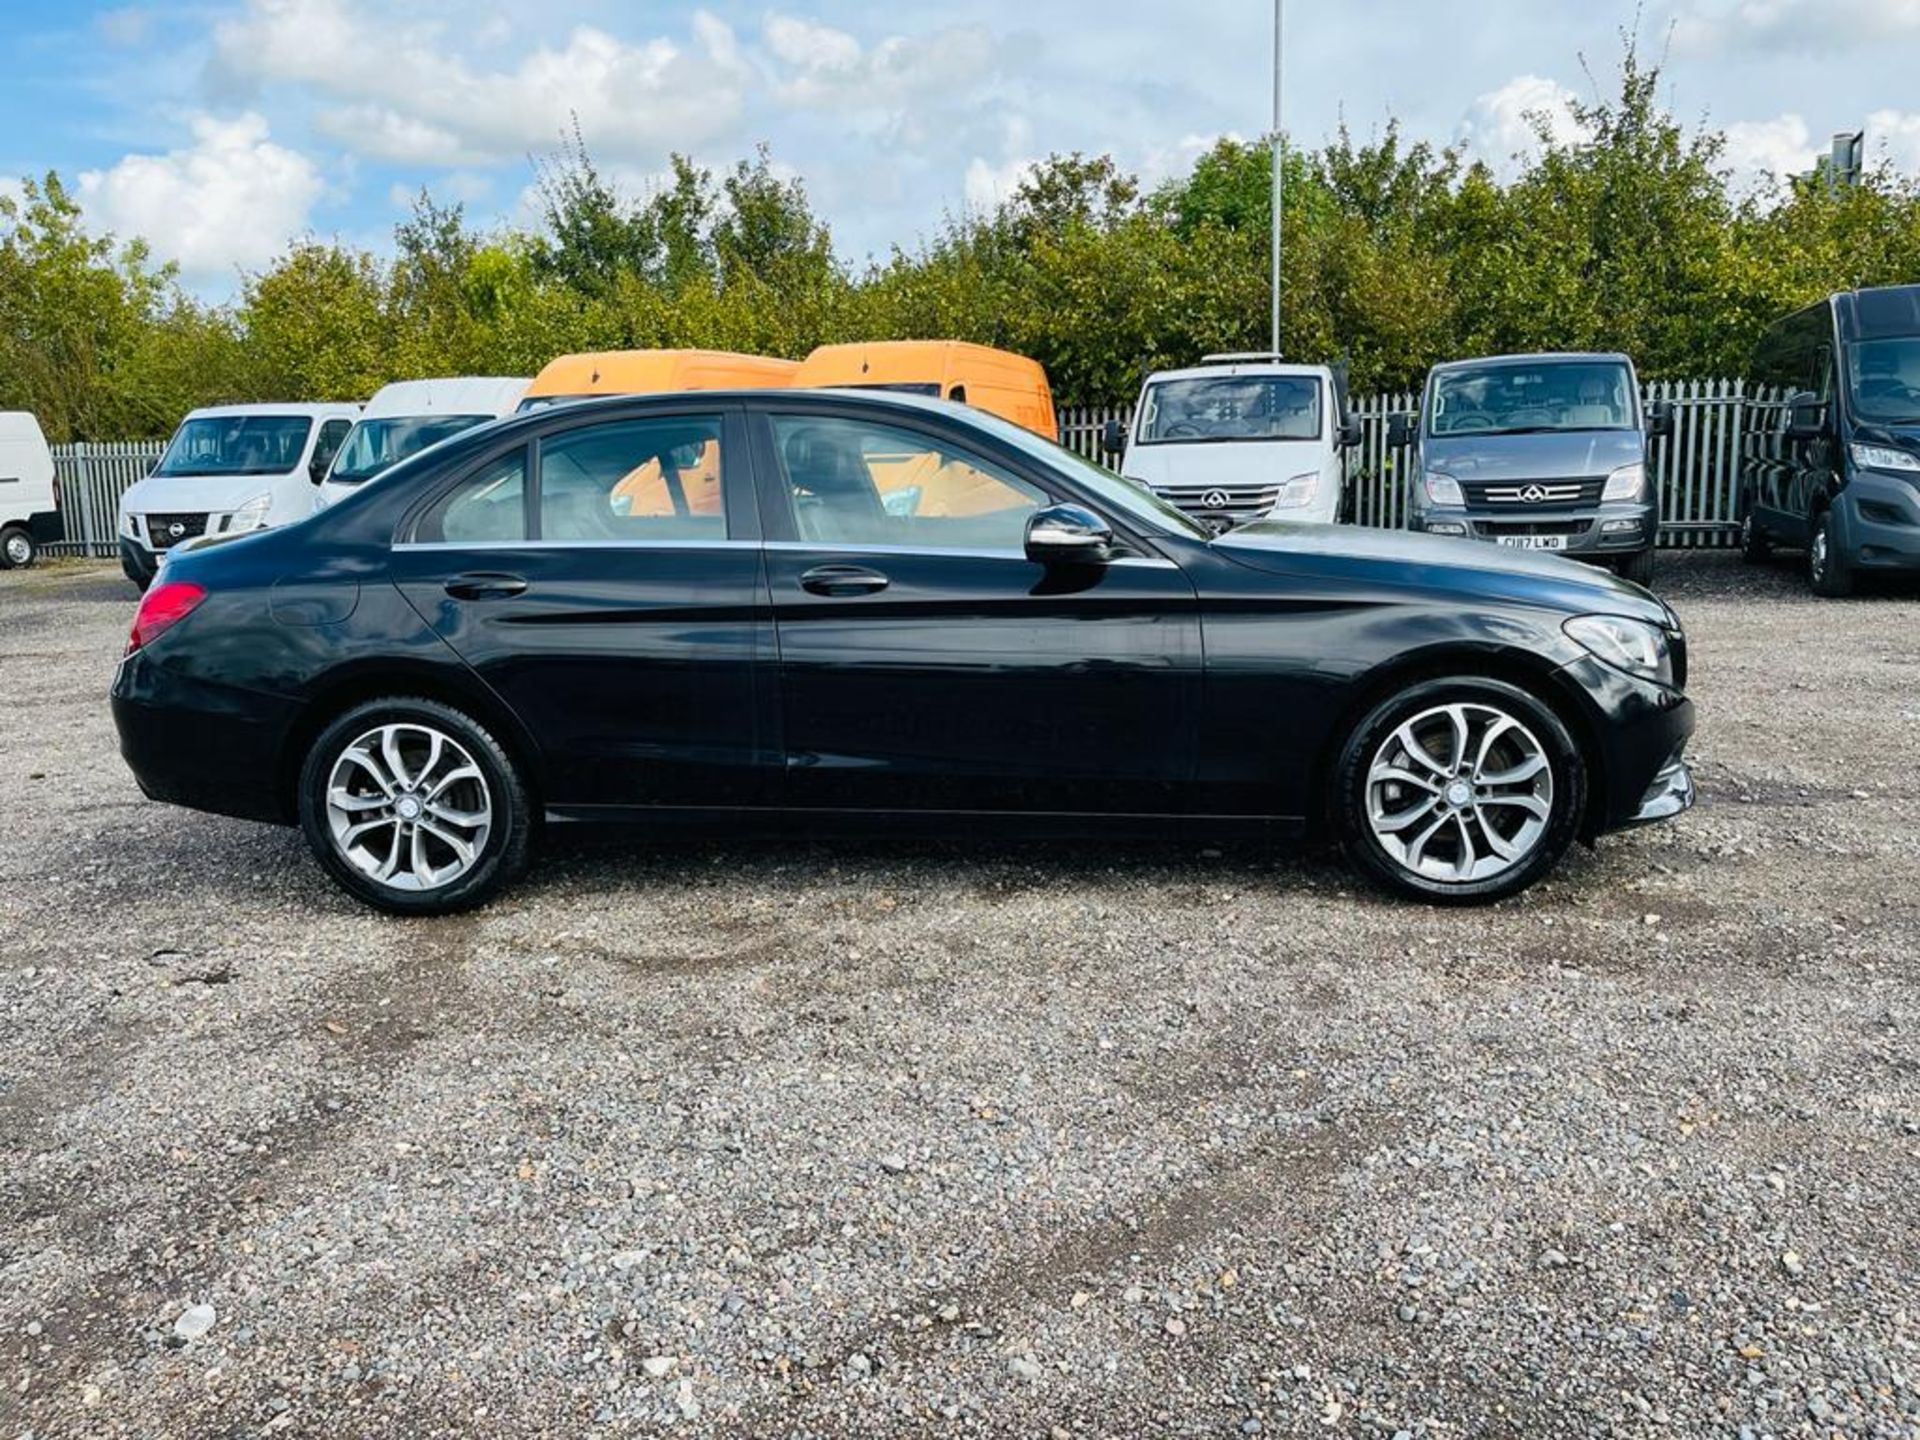 ** ON SALE ** Mercedes - Benz C220 SE Saloon 2.1 2015 "15 Reg" - Automatic - A/C - Only 72548 Miles - Image 10 of 29